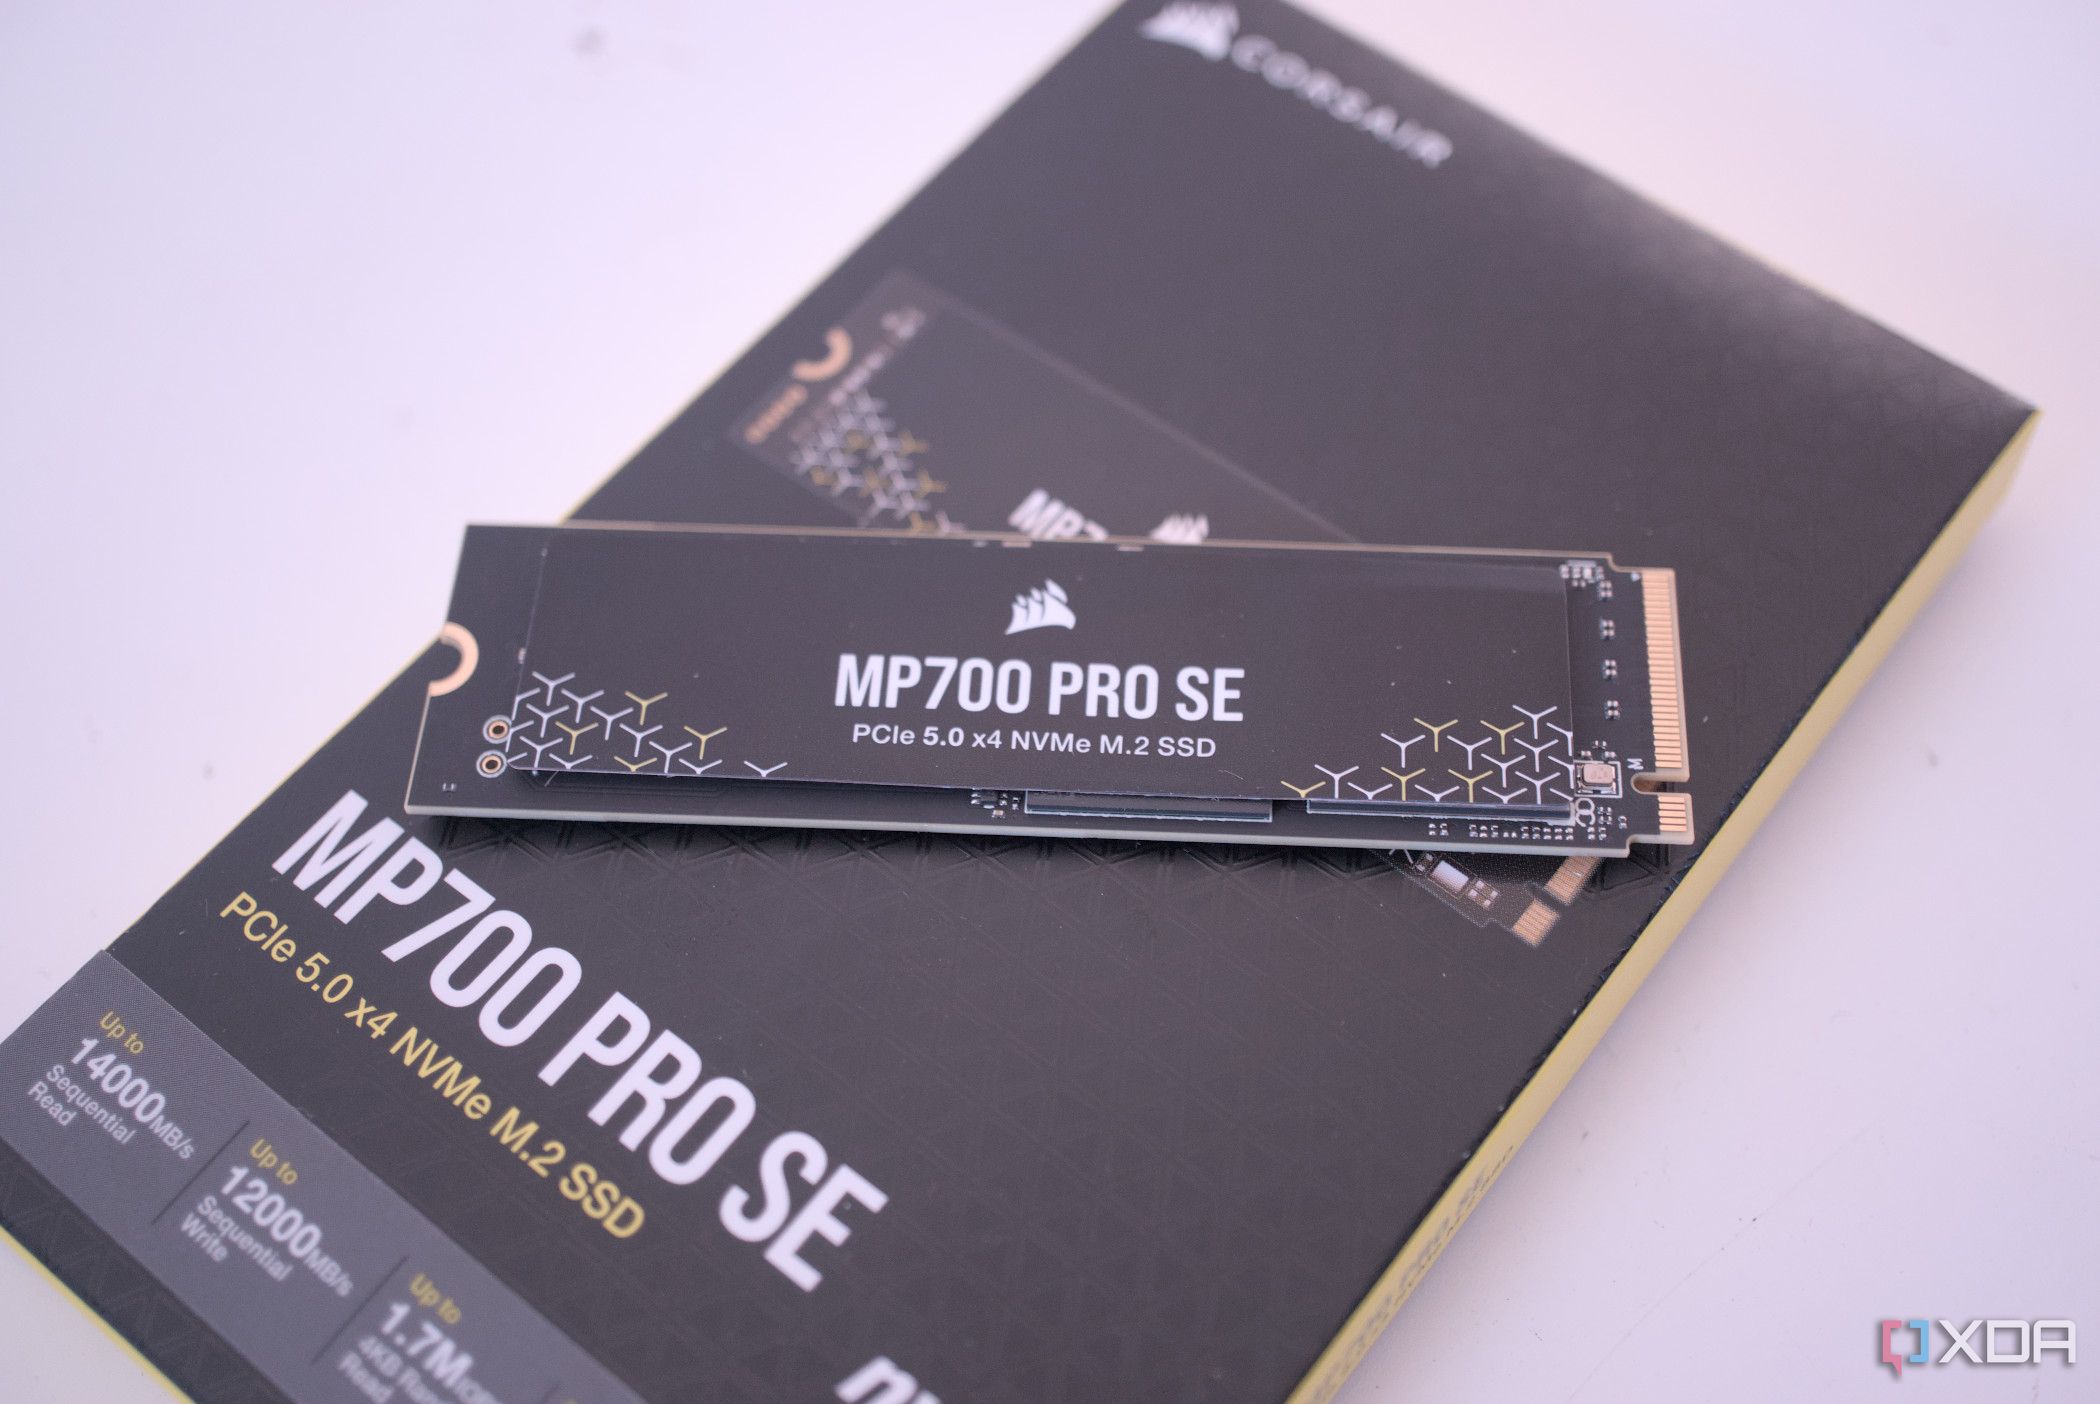 Corsair MP700 Pro SE review: Exceptionally fast SSD speeds come at a hefty price